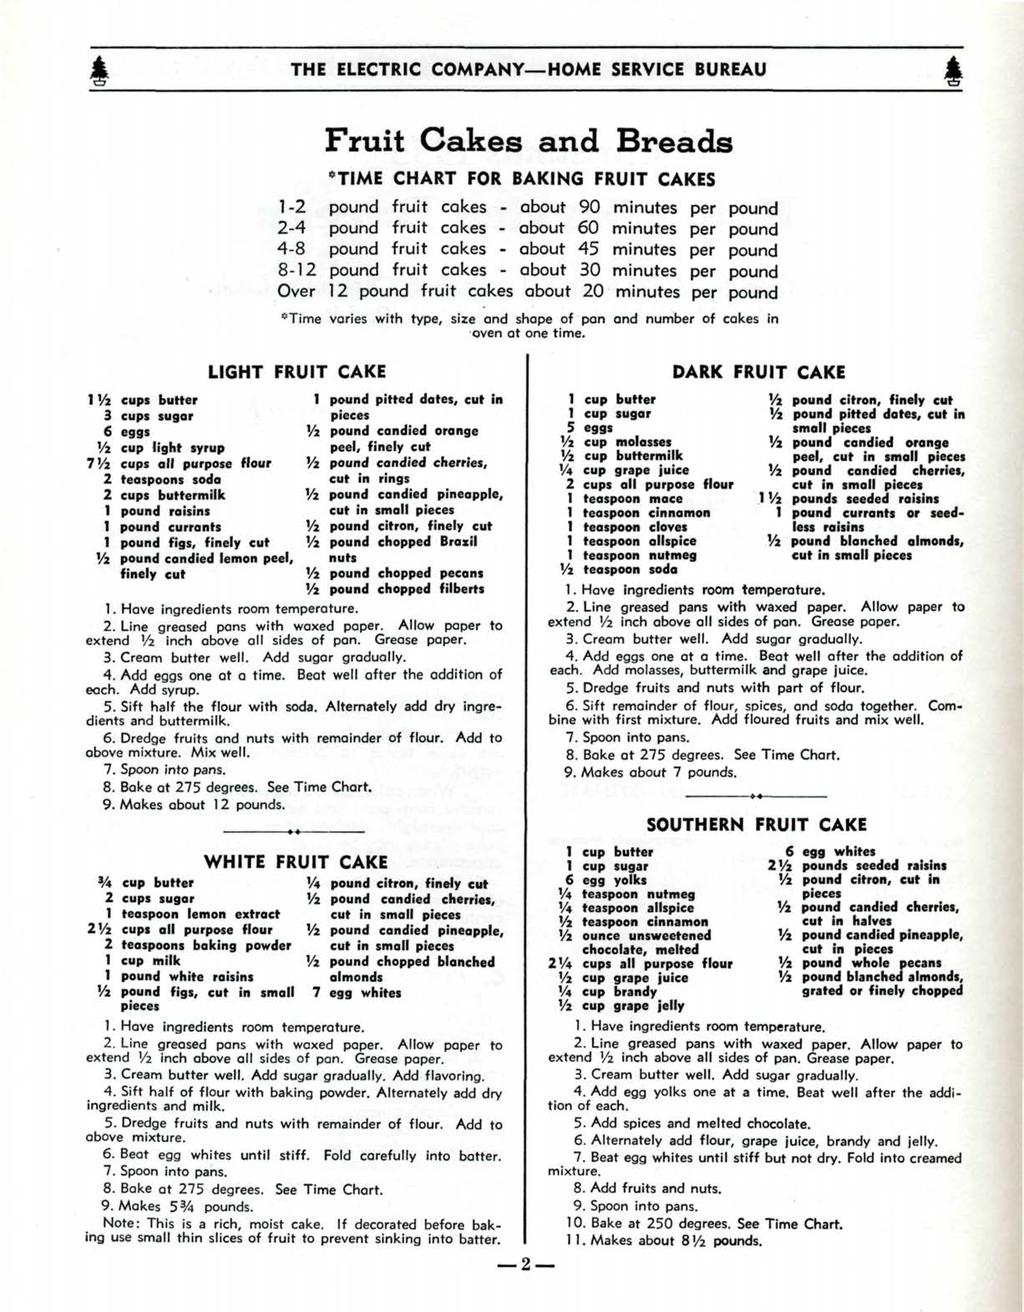 -2 2-4 4-8 8-2 Over Fruit Cakes and Breads TIME CHART FOR BAKING FRUIT CAKES pound fruit cakes - about 90 minutes per pound pound fruit cakes about 60 minutes per pound pound fruit cakes about 45